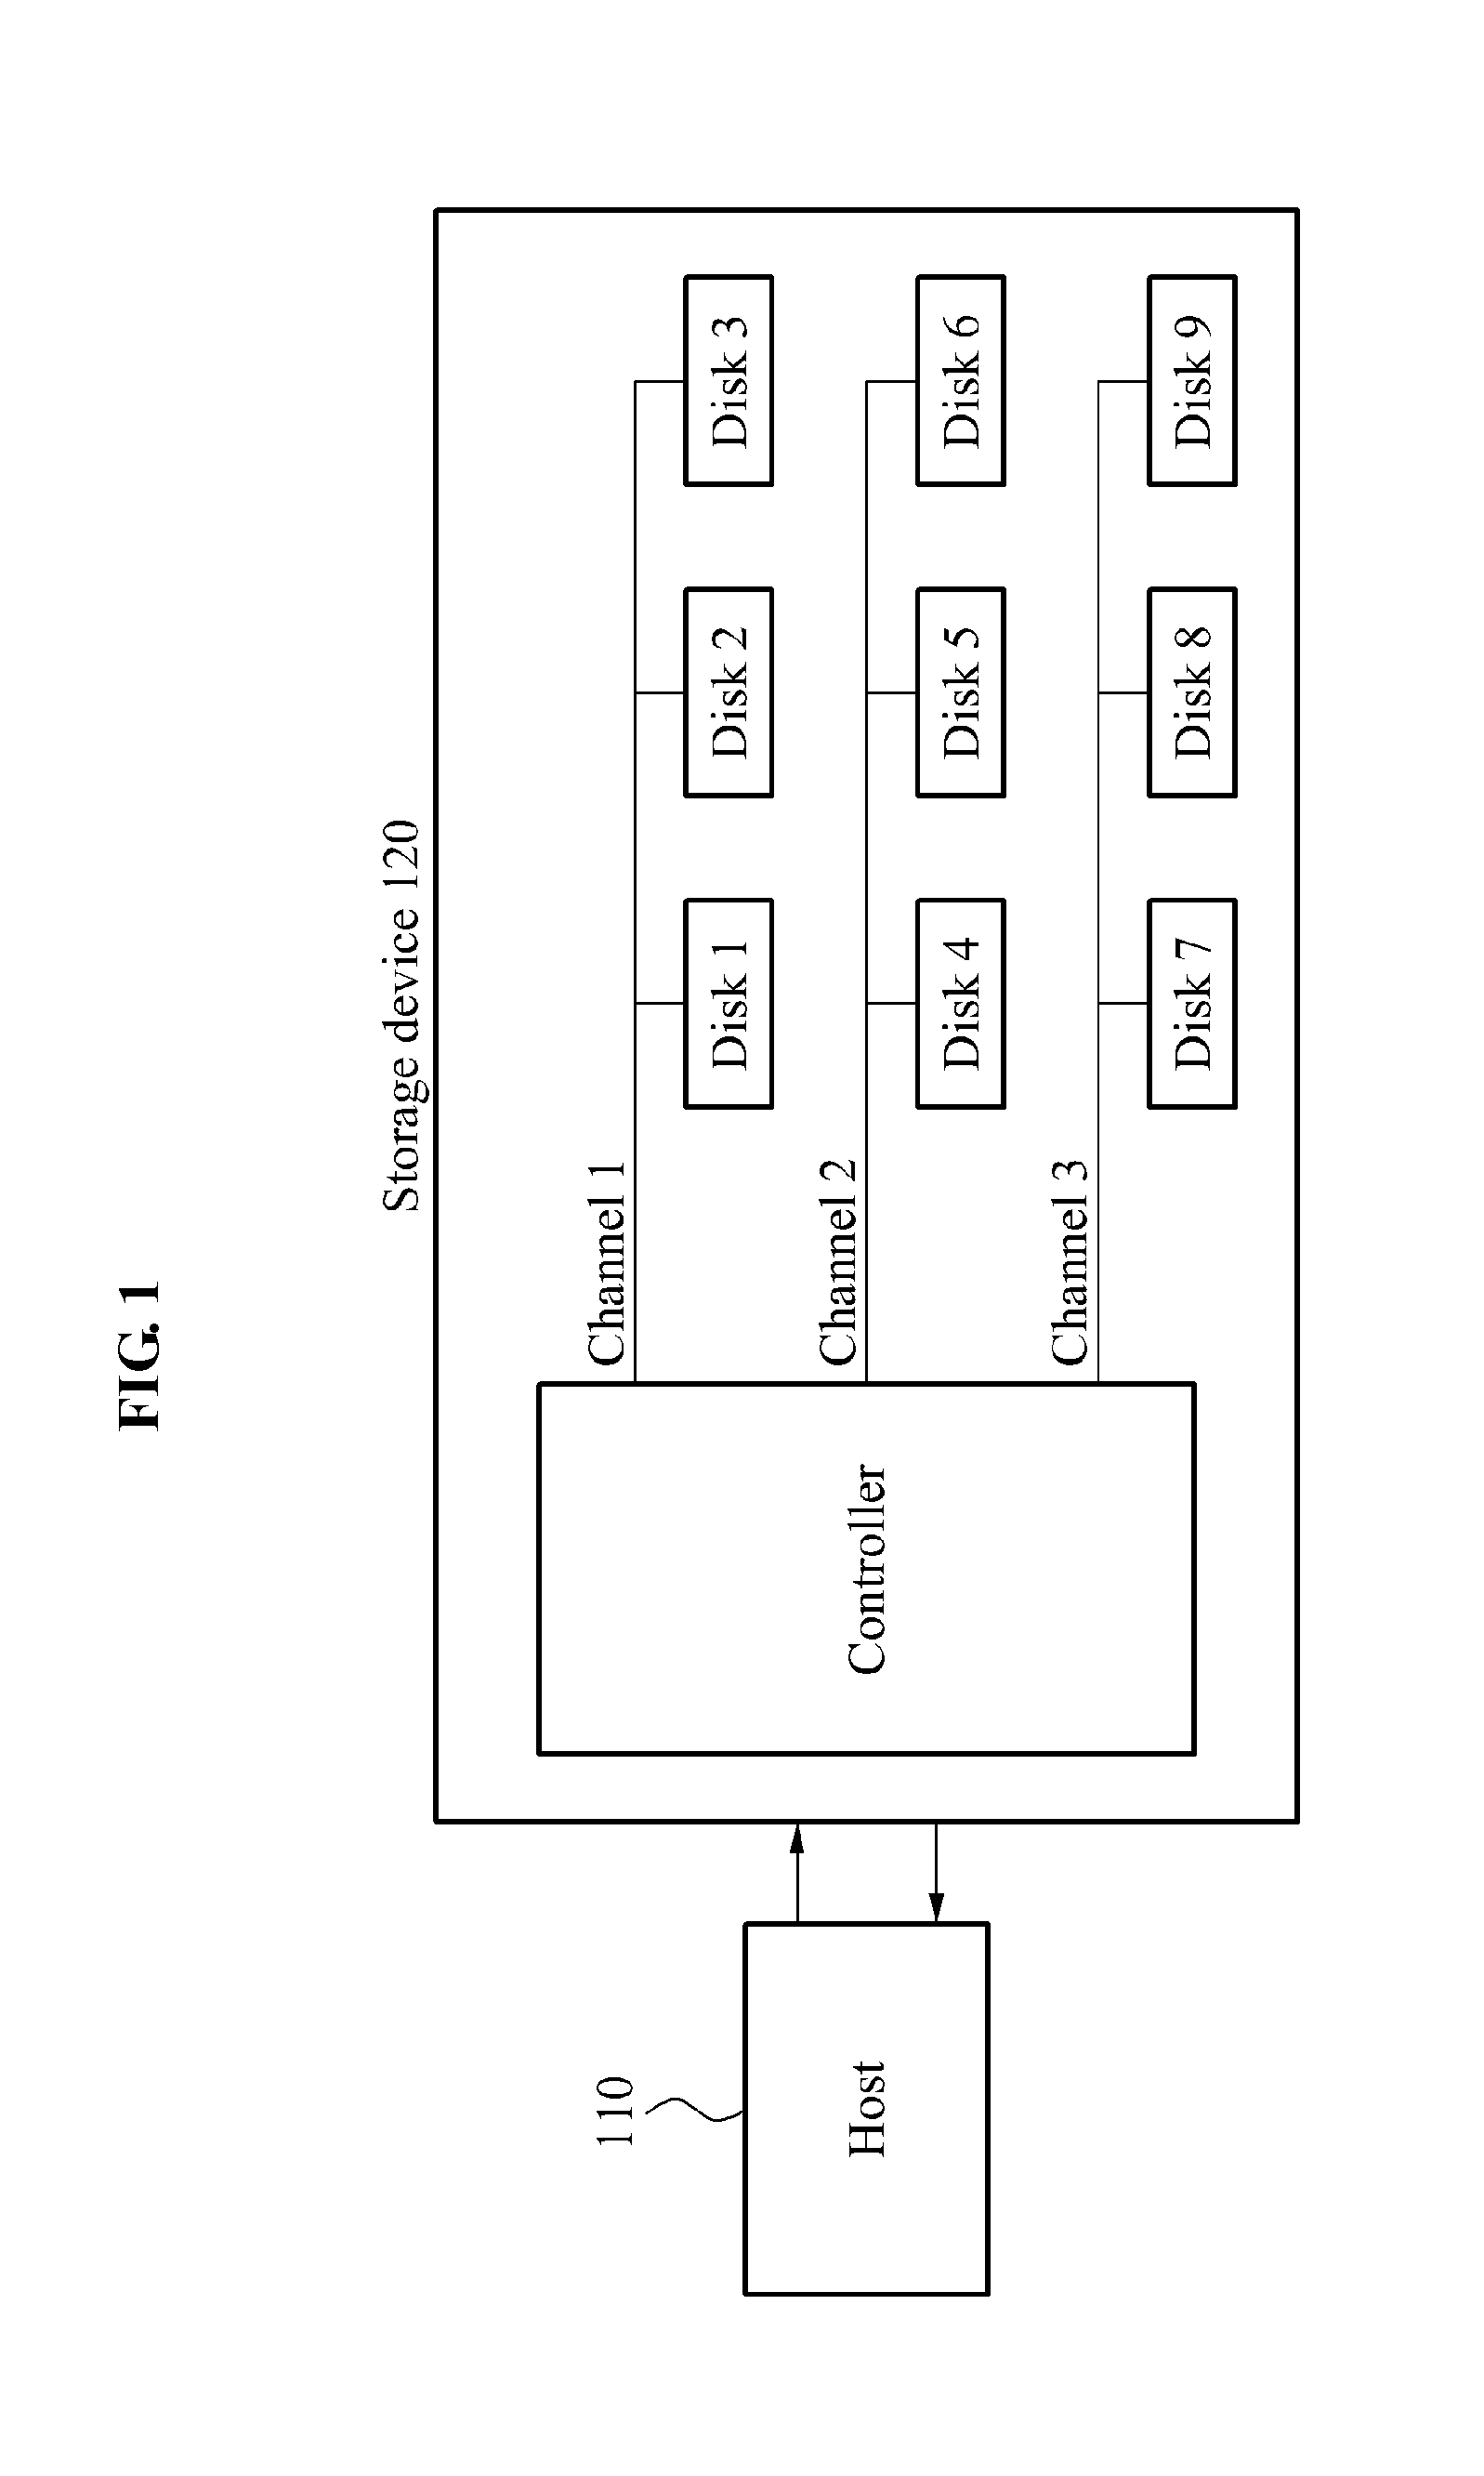 Storage for adaptively determining a processing technique with respect to a host request based on partition data  and operating method for the storage device